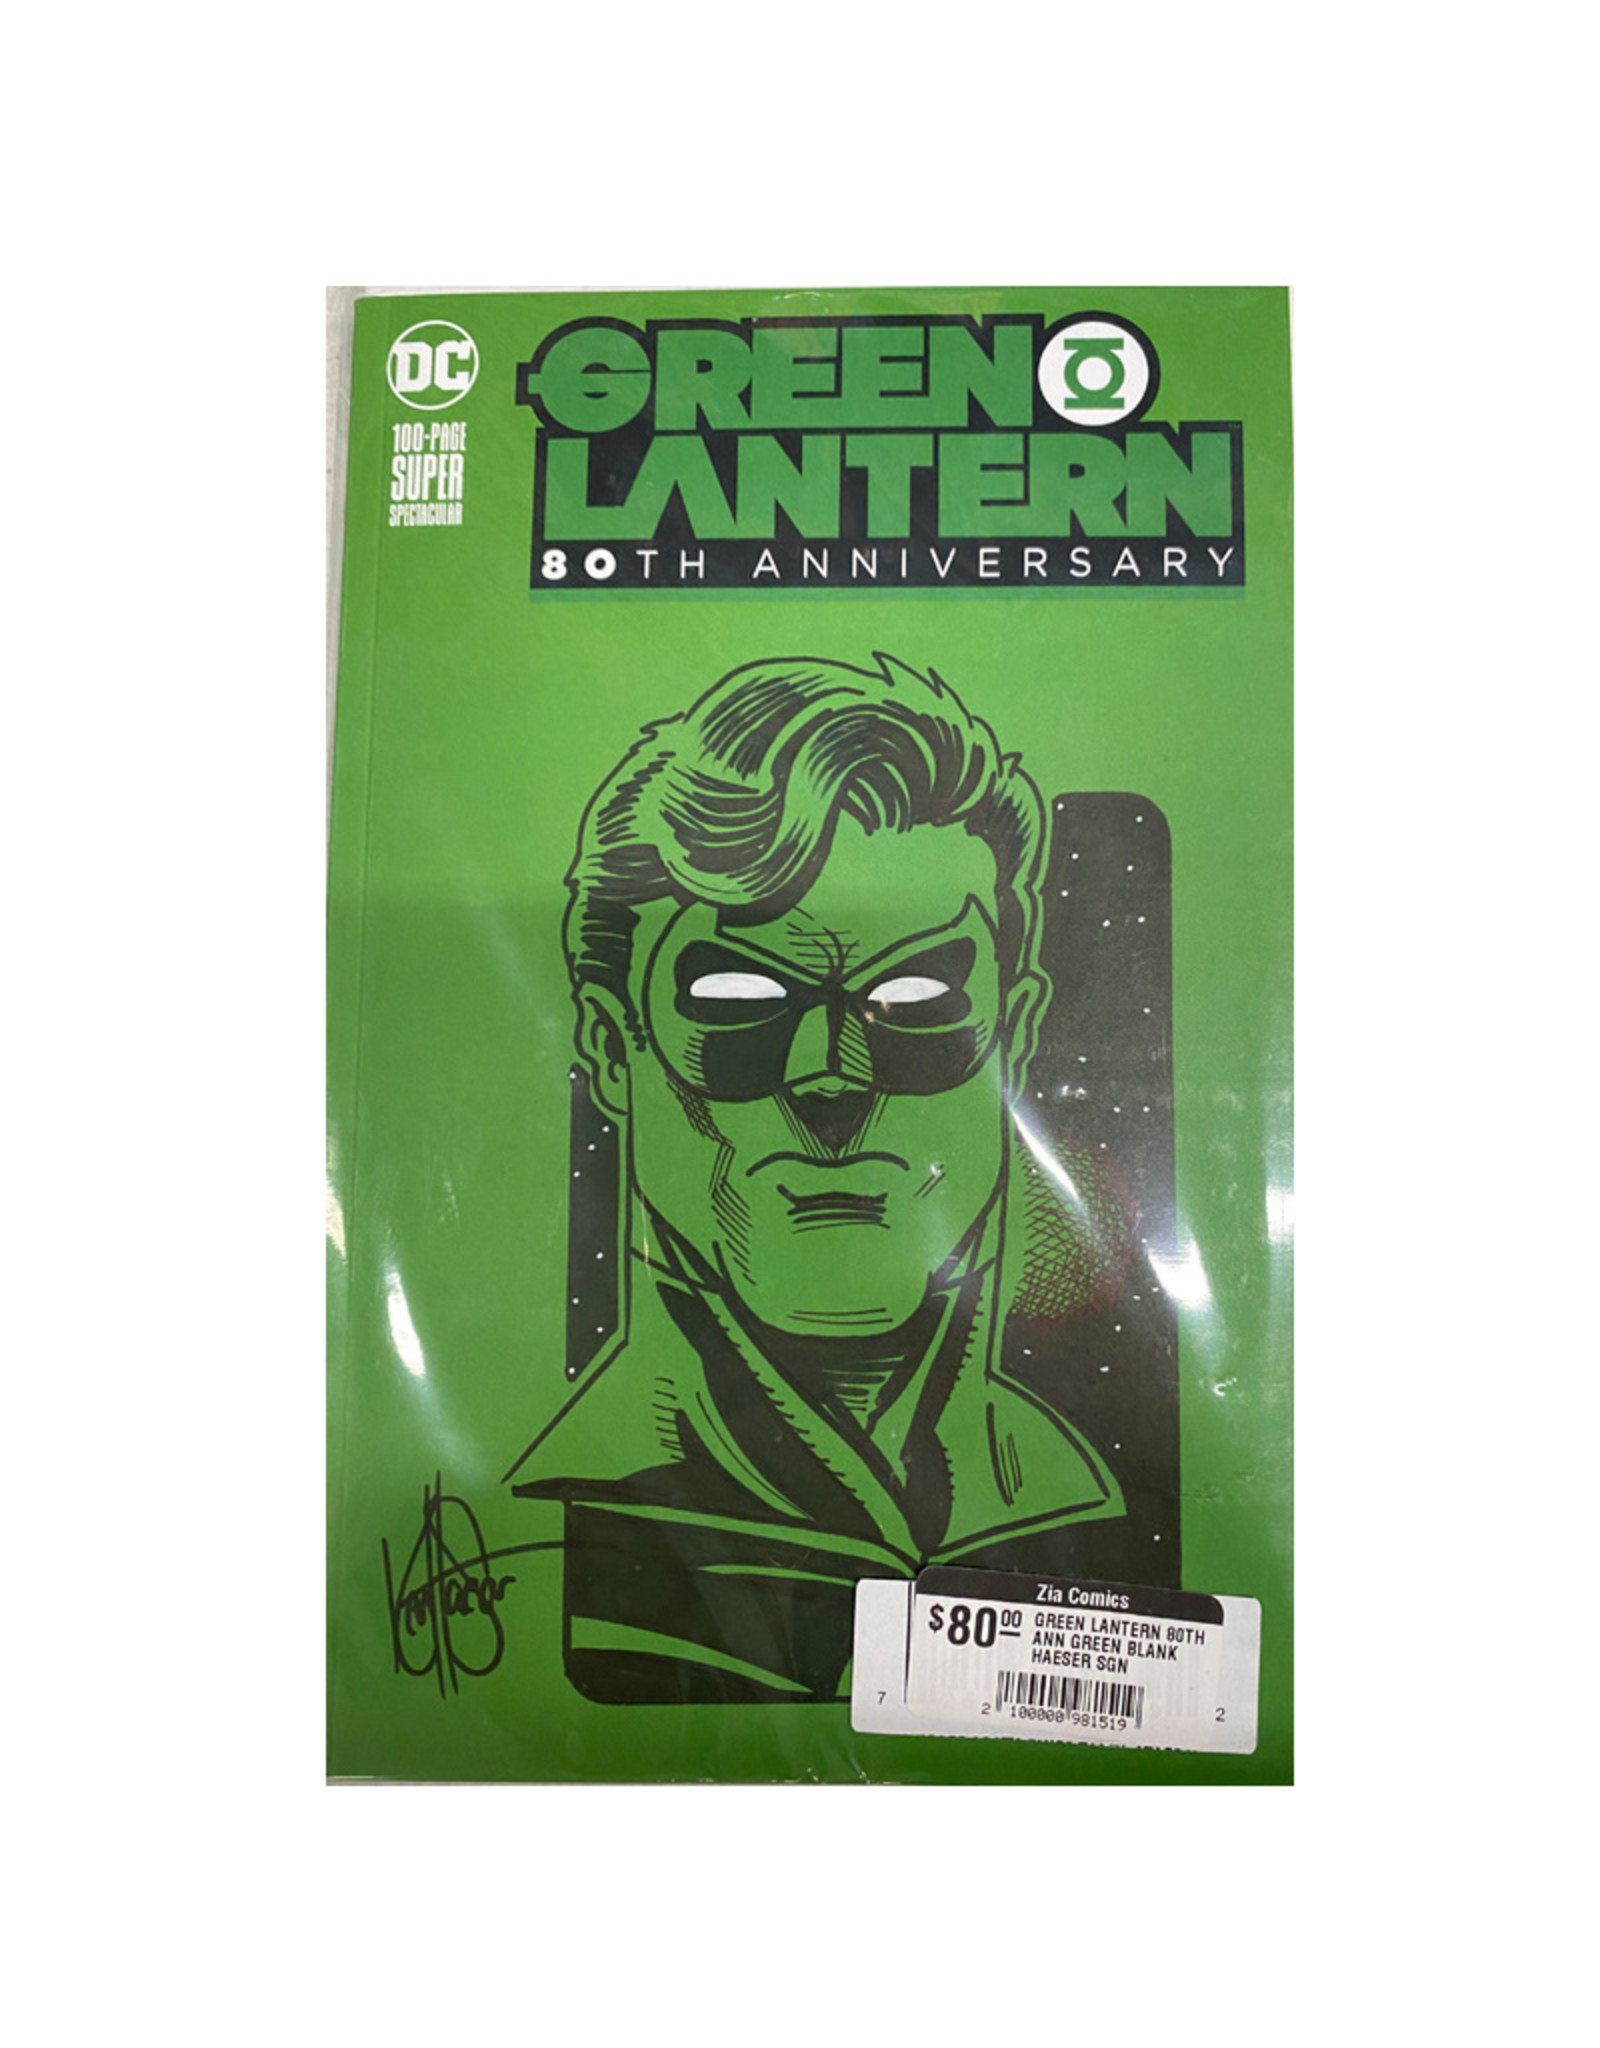 DC Comics Green Lantern 80th Anniversary Blank variant remarked and signed by Ken Haeser